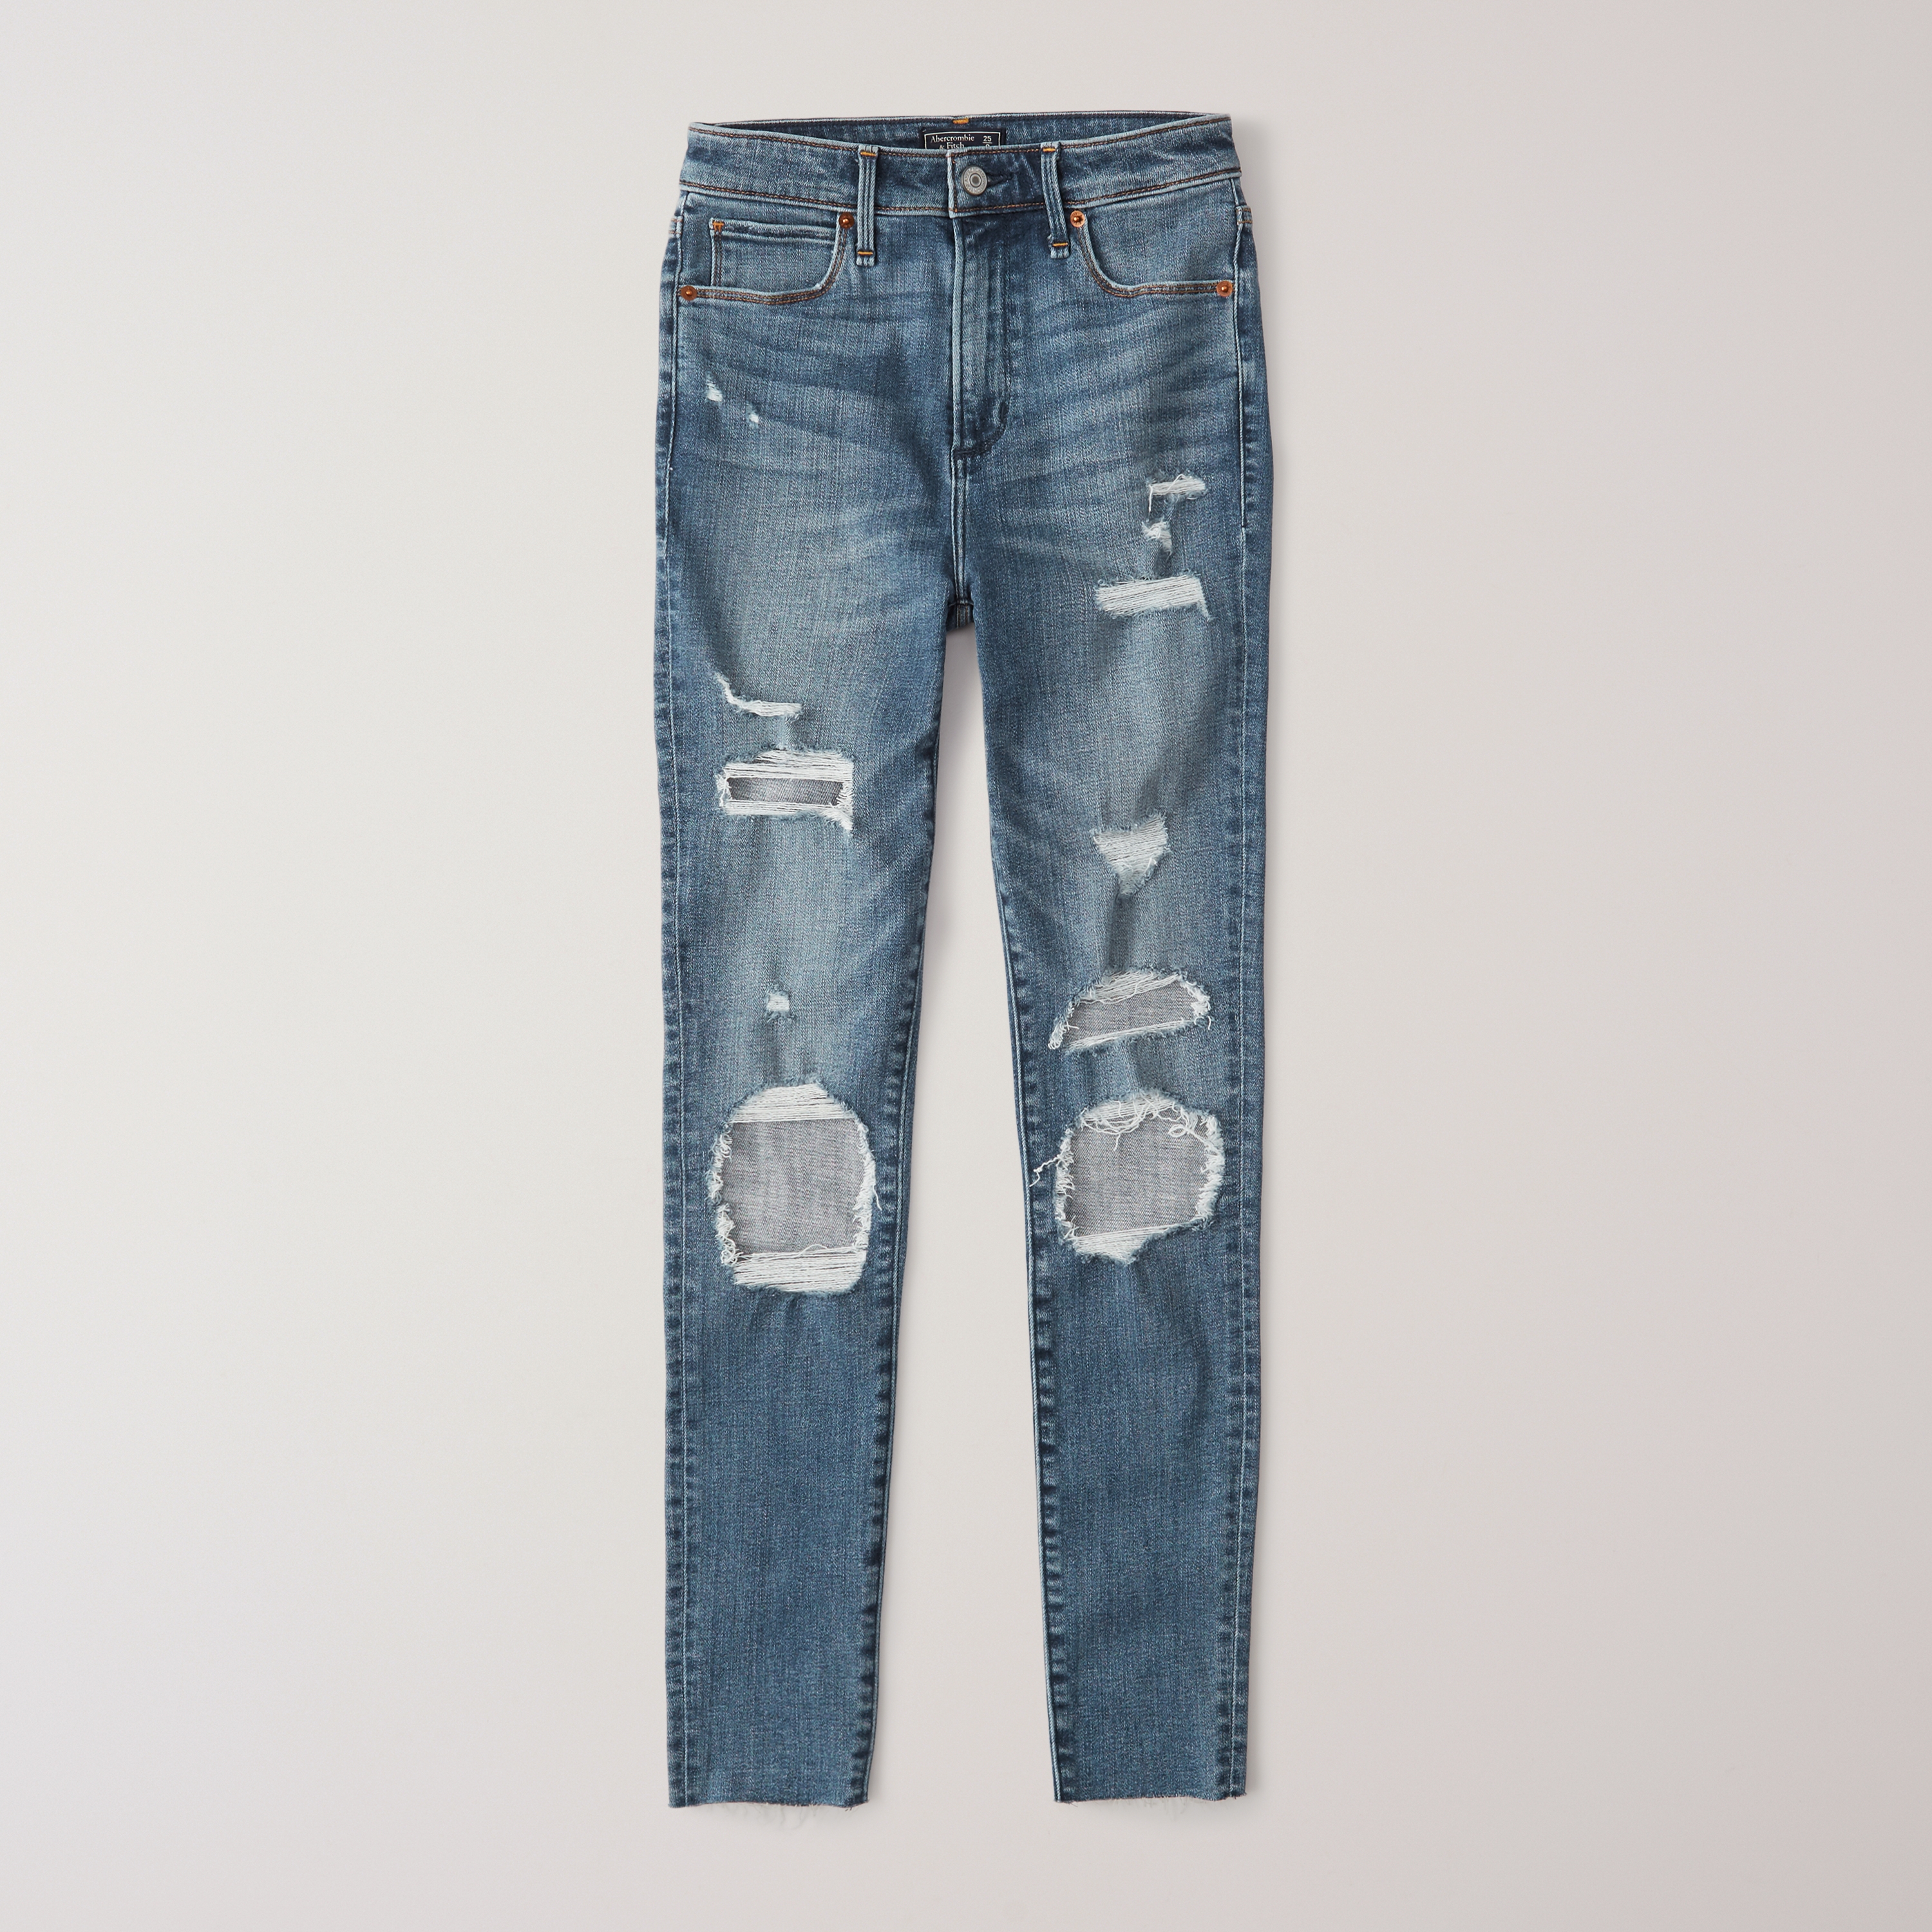 do abercrombie and fitch jeans stretch out